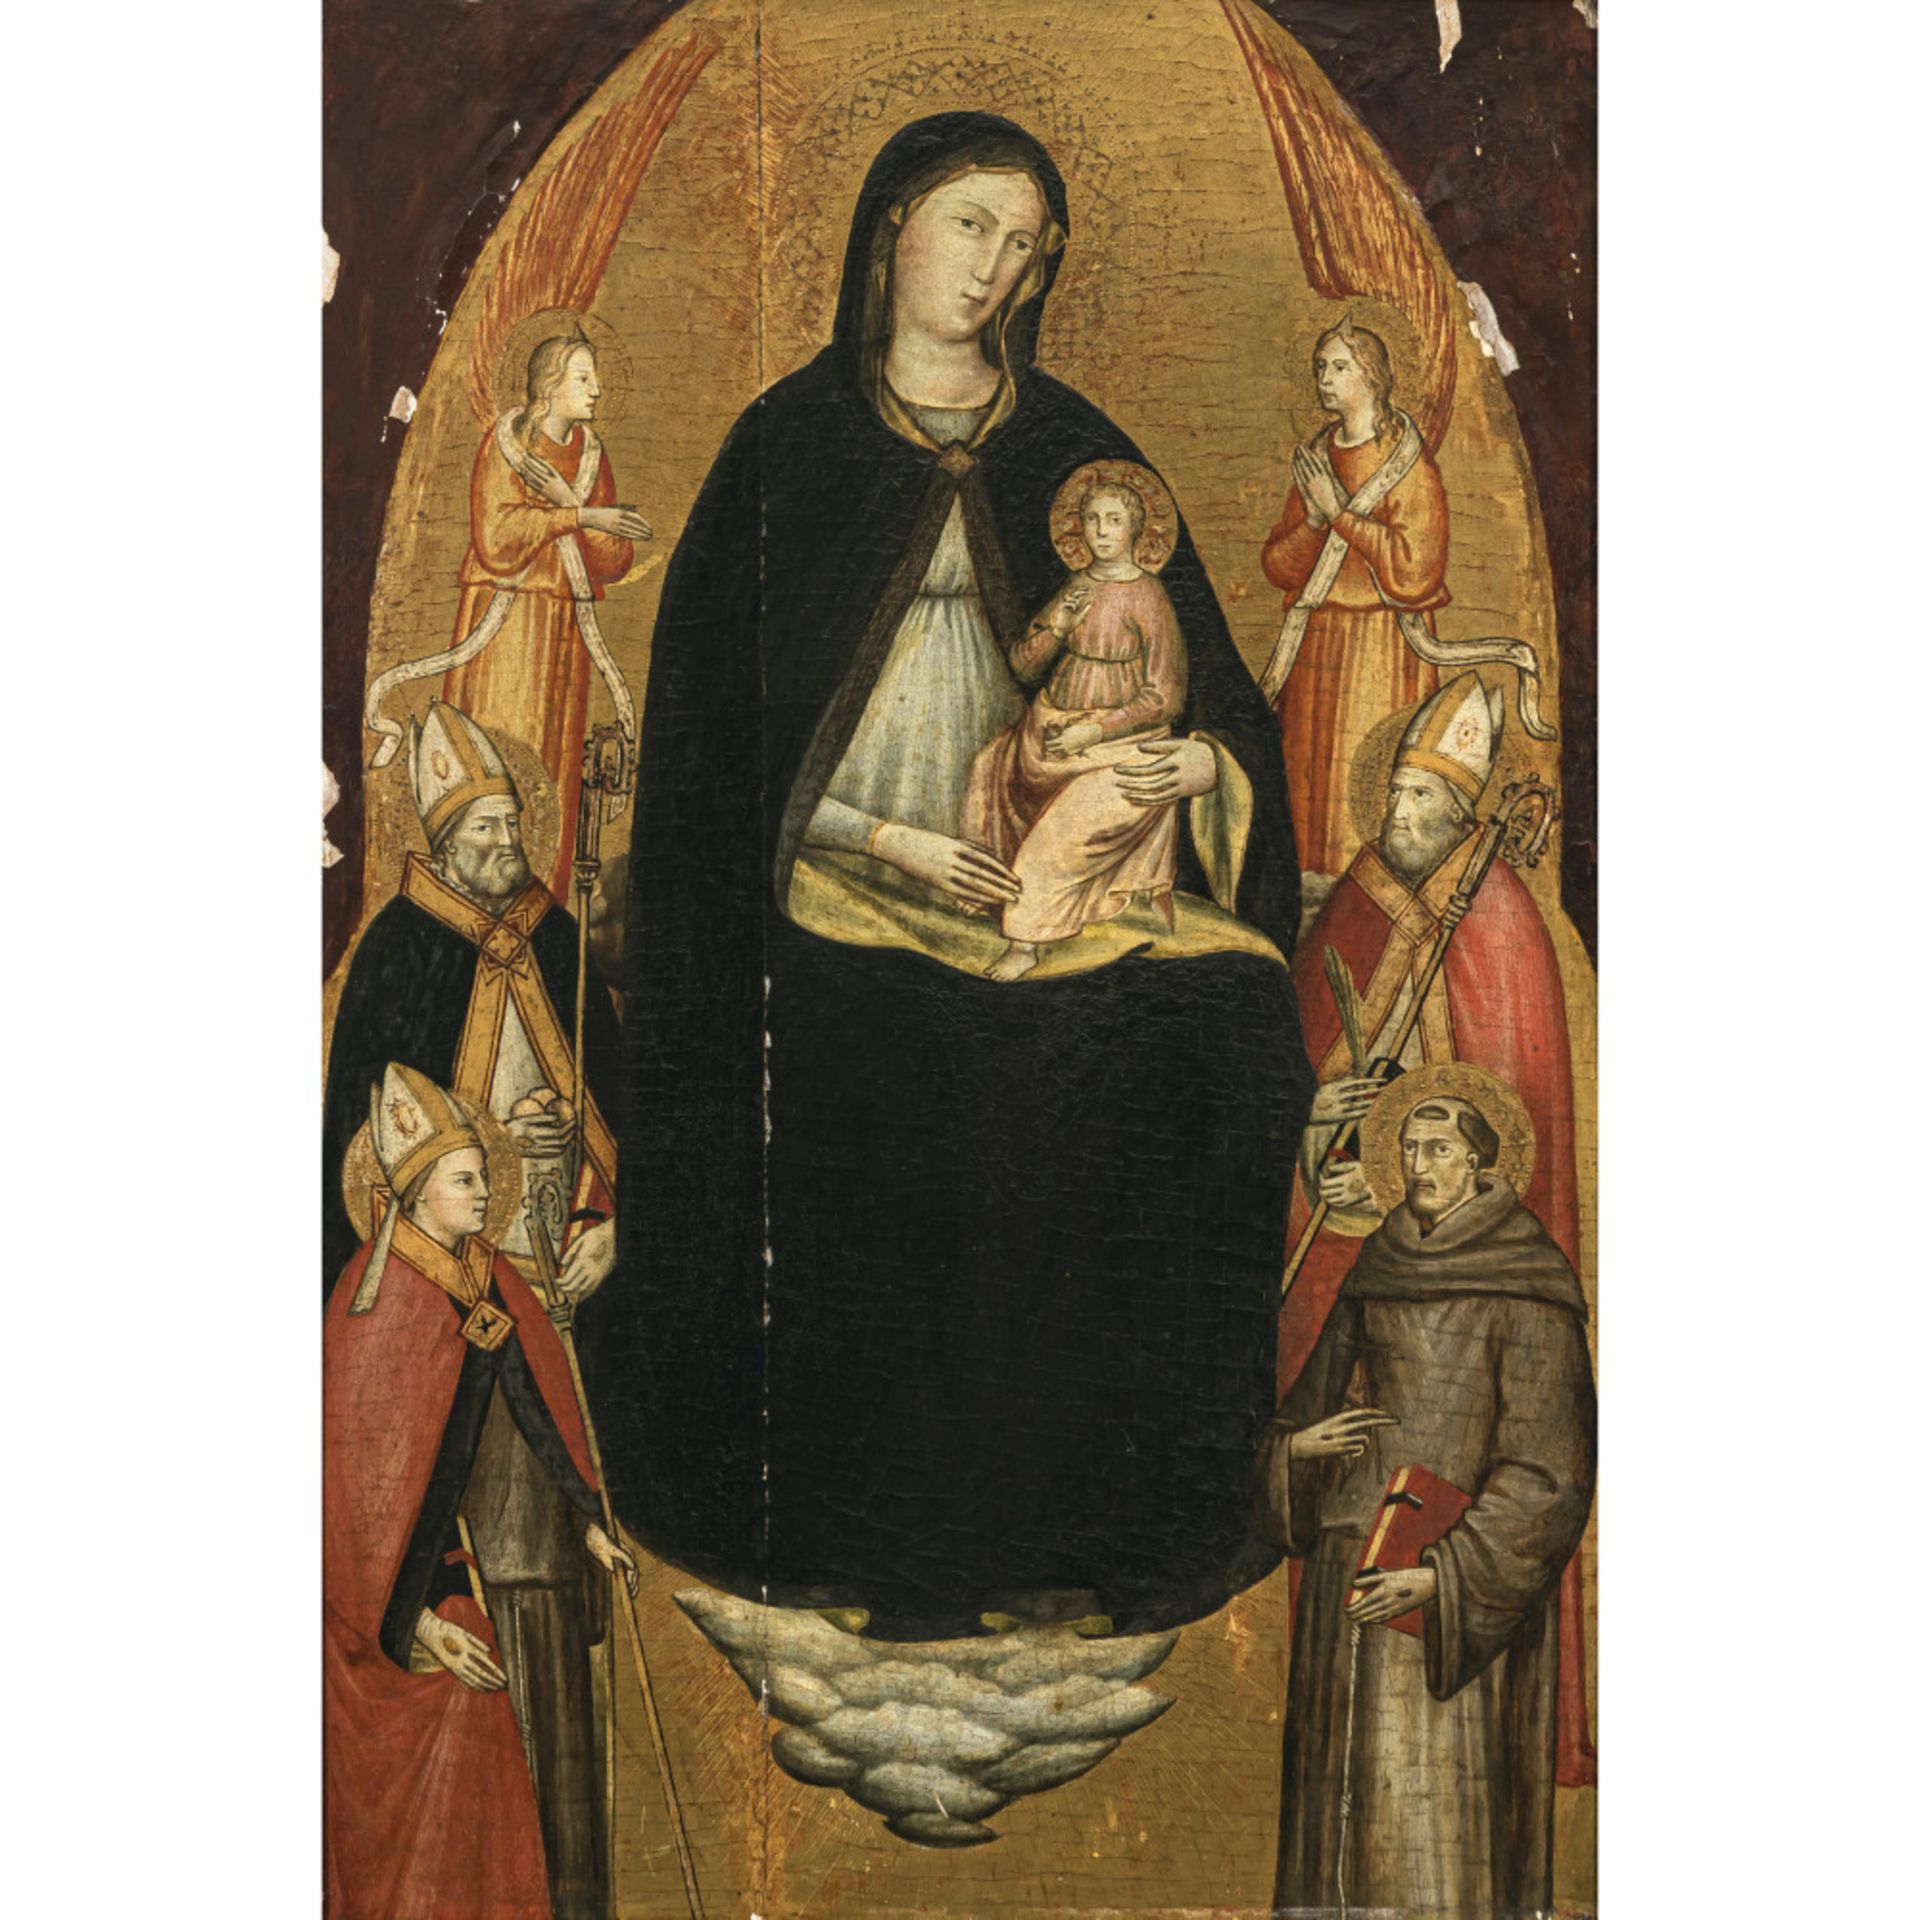 Italien Late 14th century / early 15th century - Mary with Child and saints